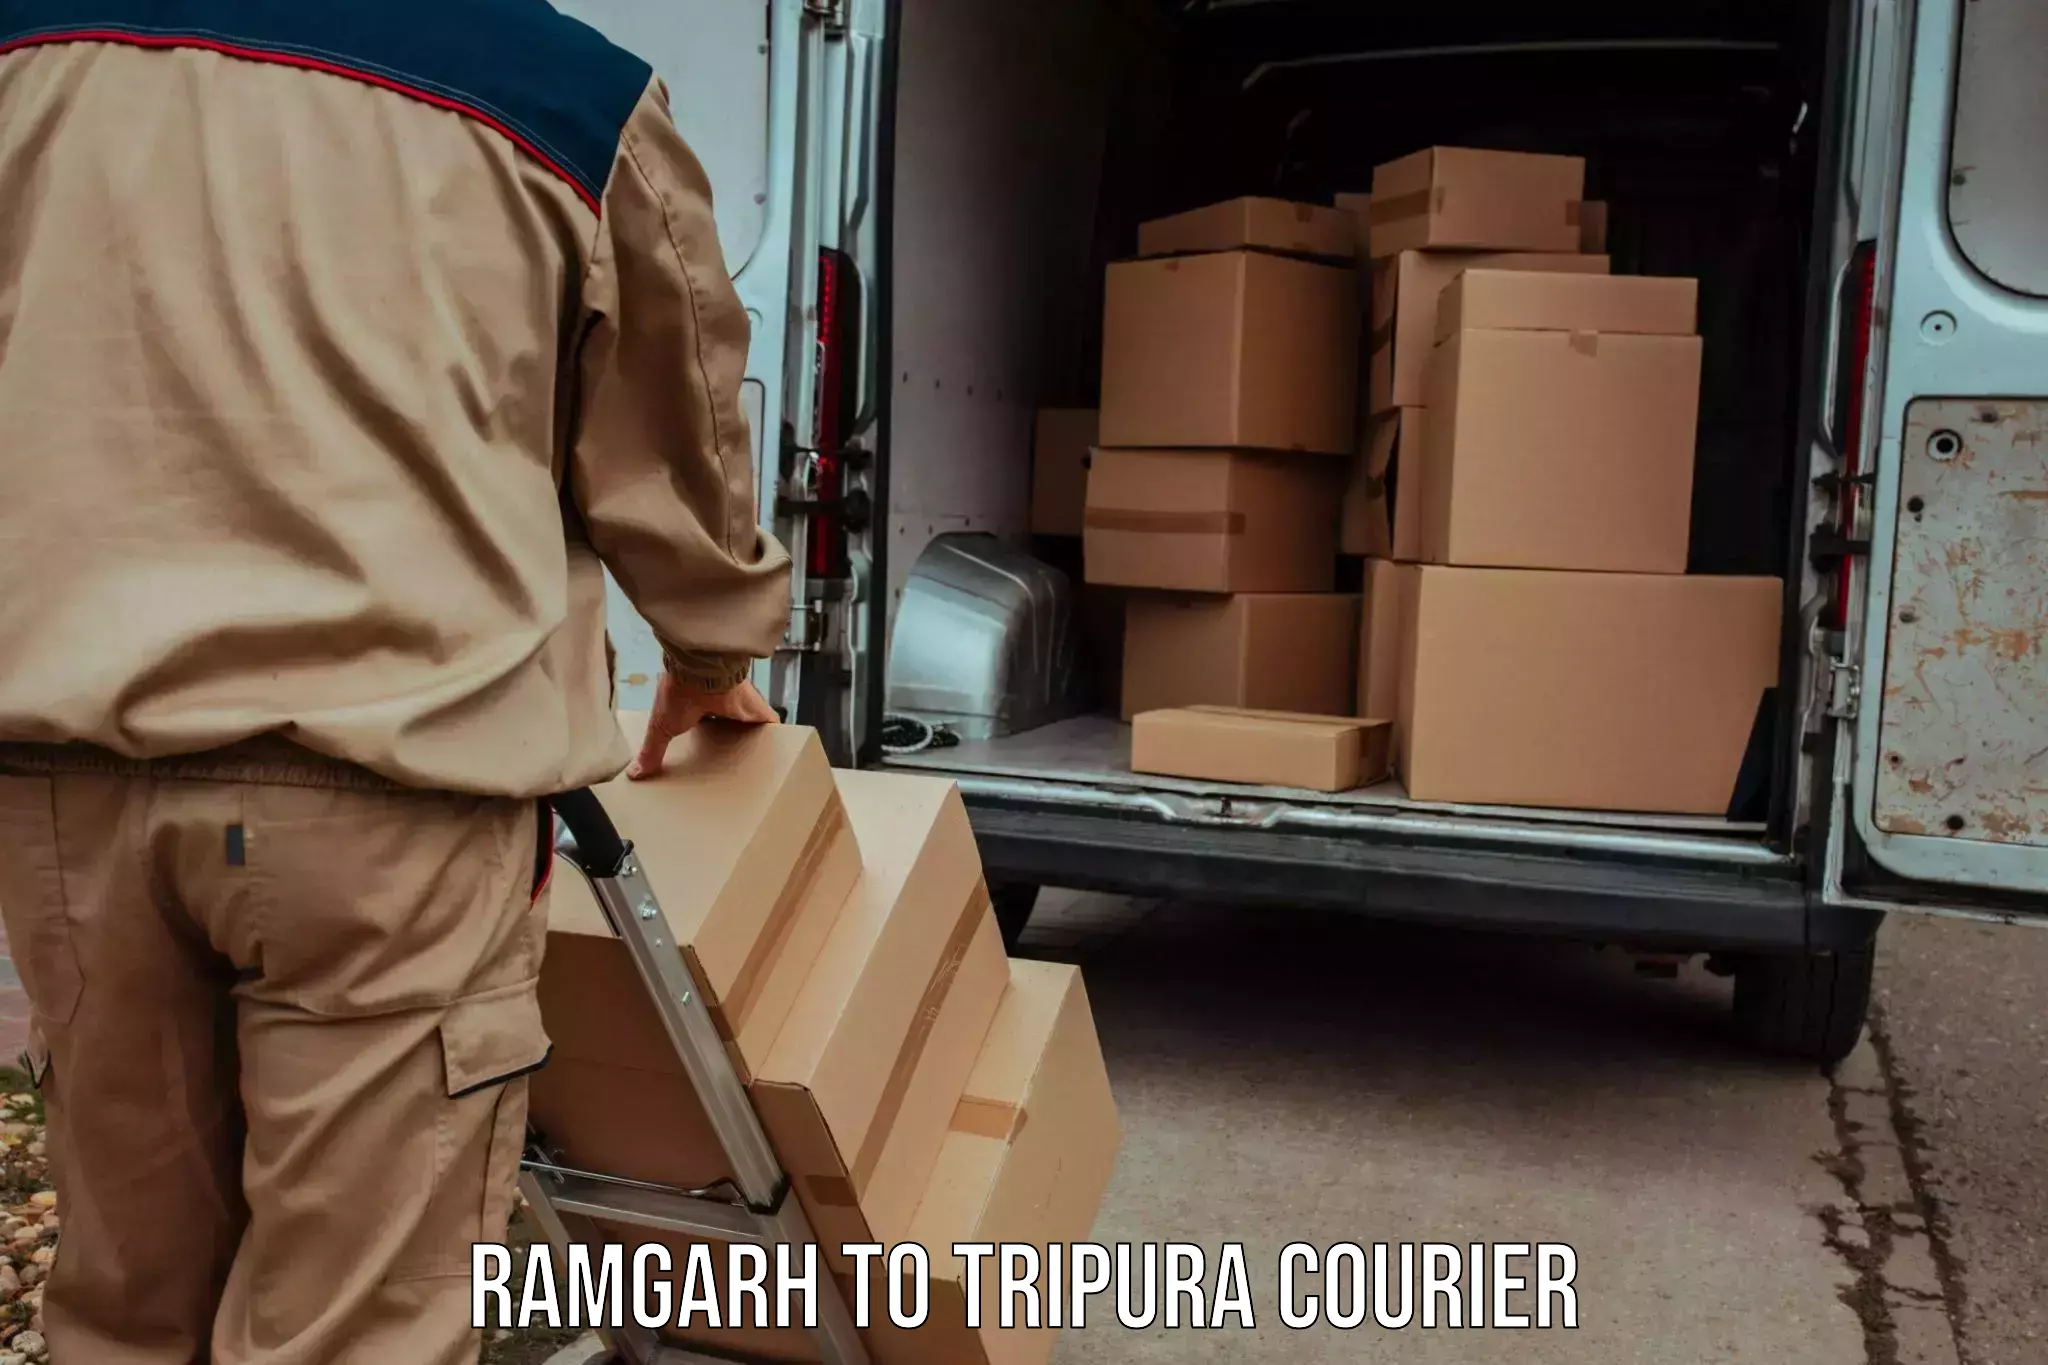 Local courier options Ramgarh to Udaipur Tripura